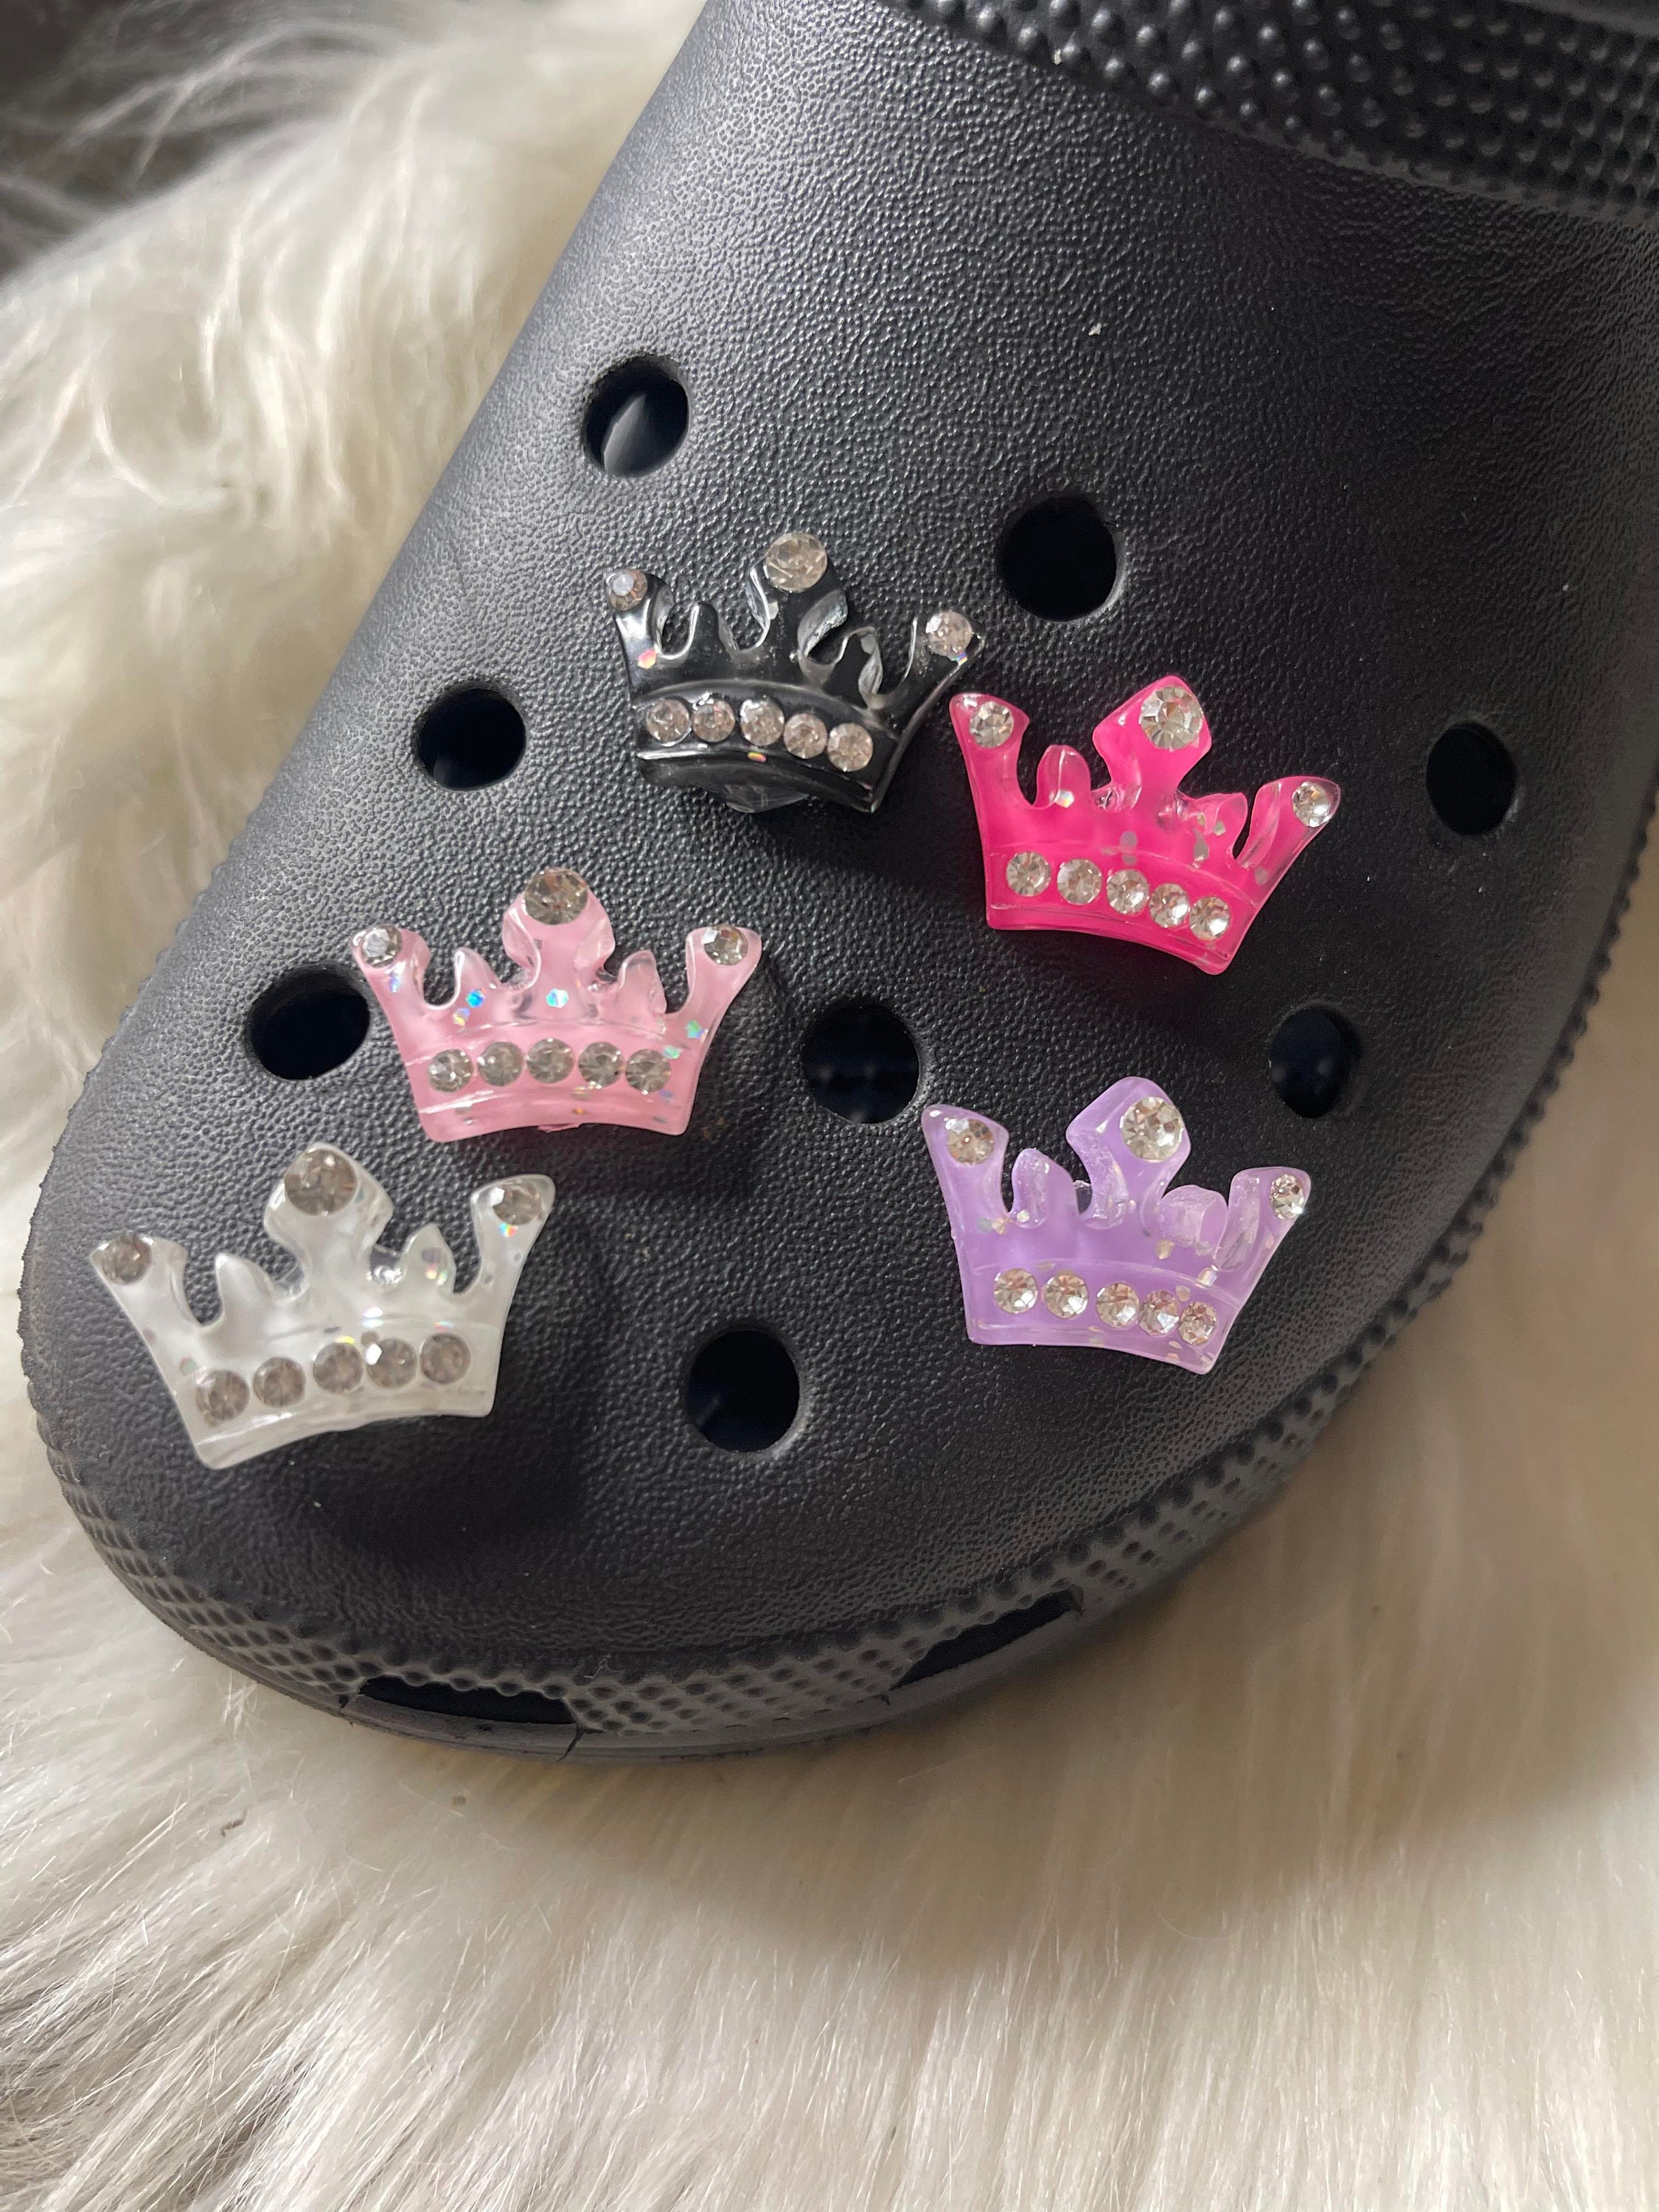 Elite Croc Shoe Charms - Bling Croc Charms - Bling Queen Crown Charm -  Bling Heart Charm - Pearl Flower Charm